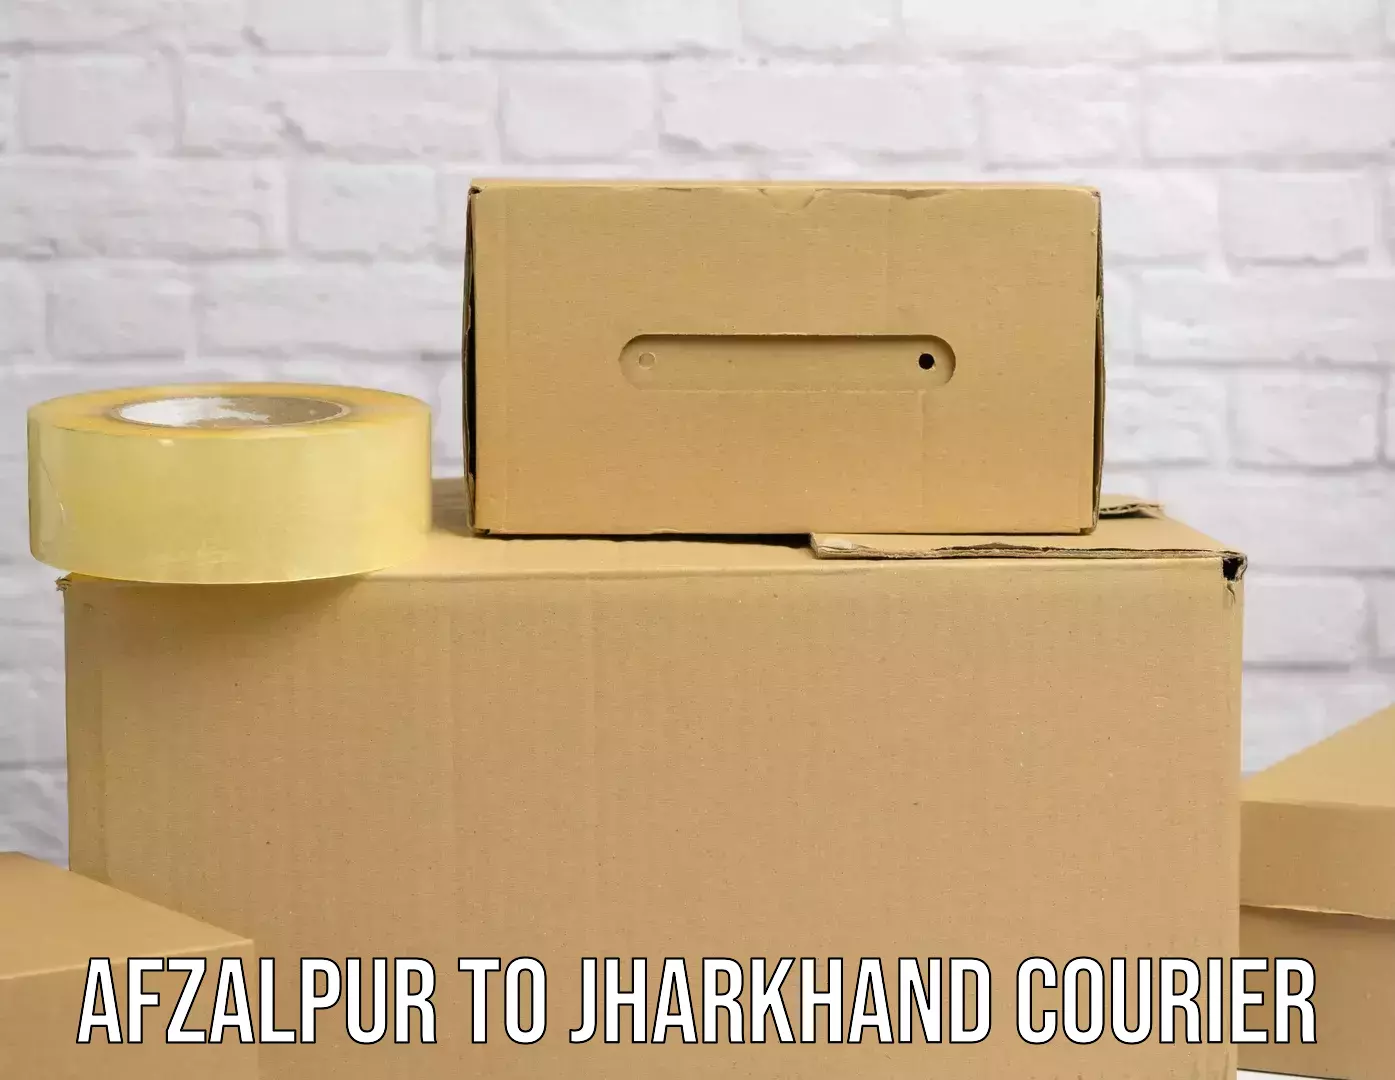 End-to-end delivery Afzalpur to IIT Dhanbad